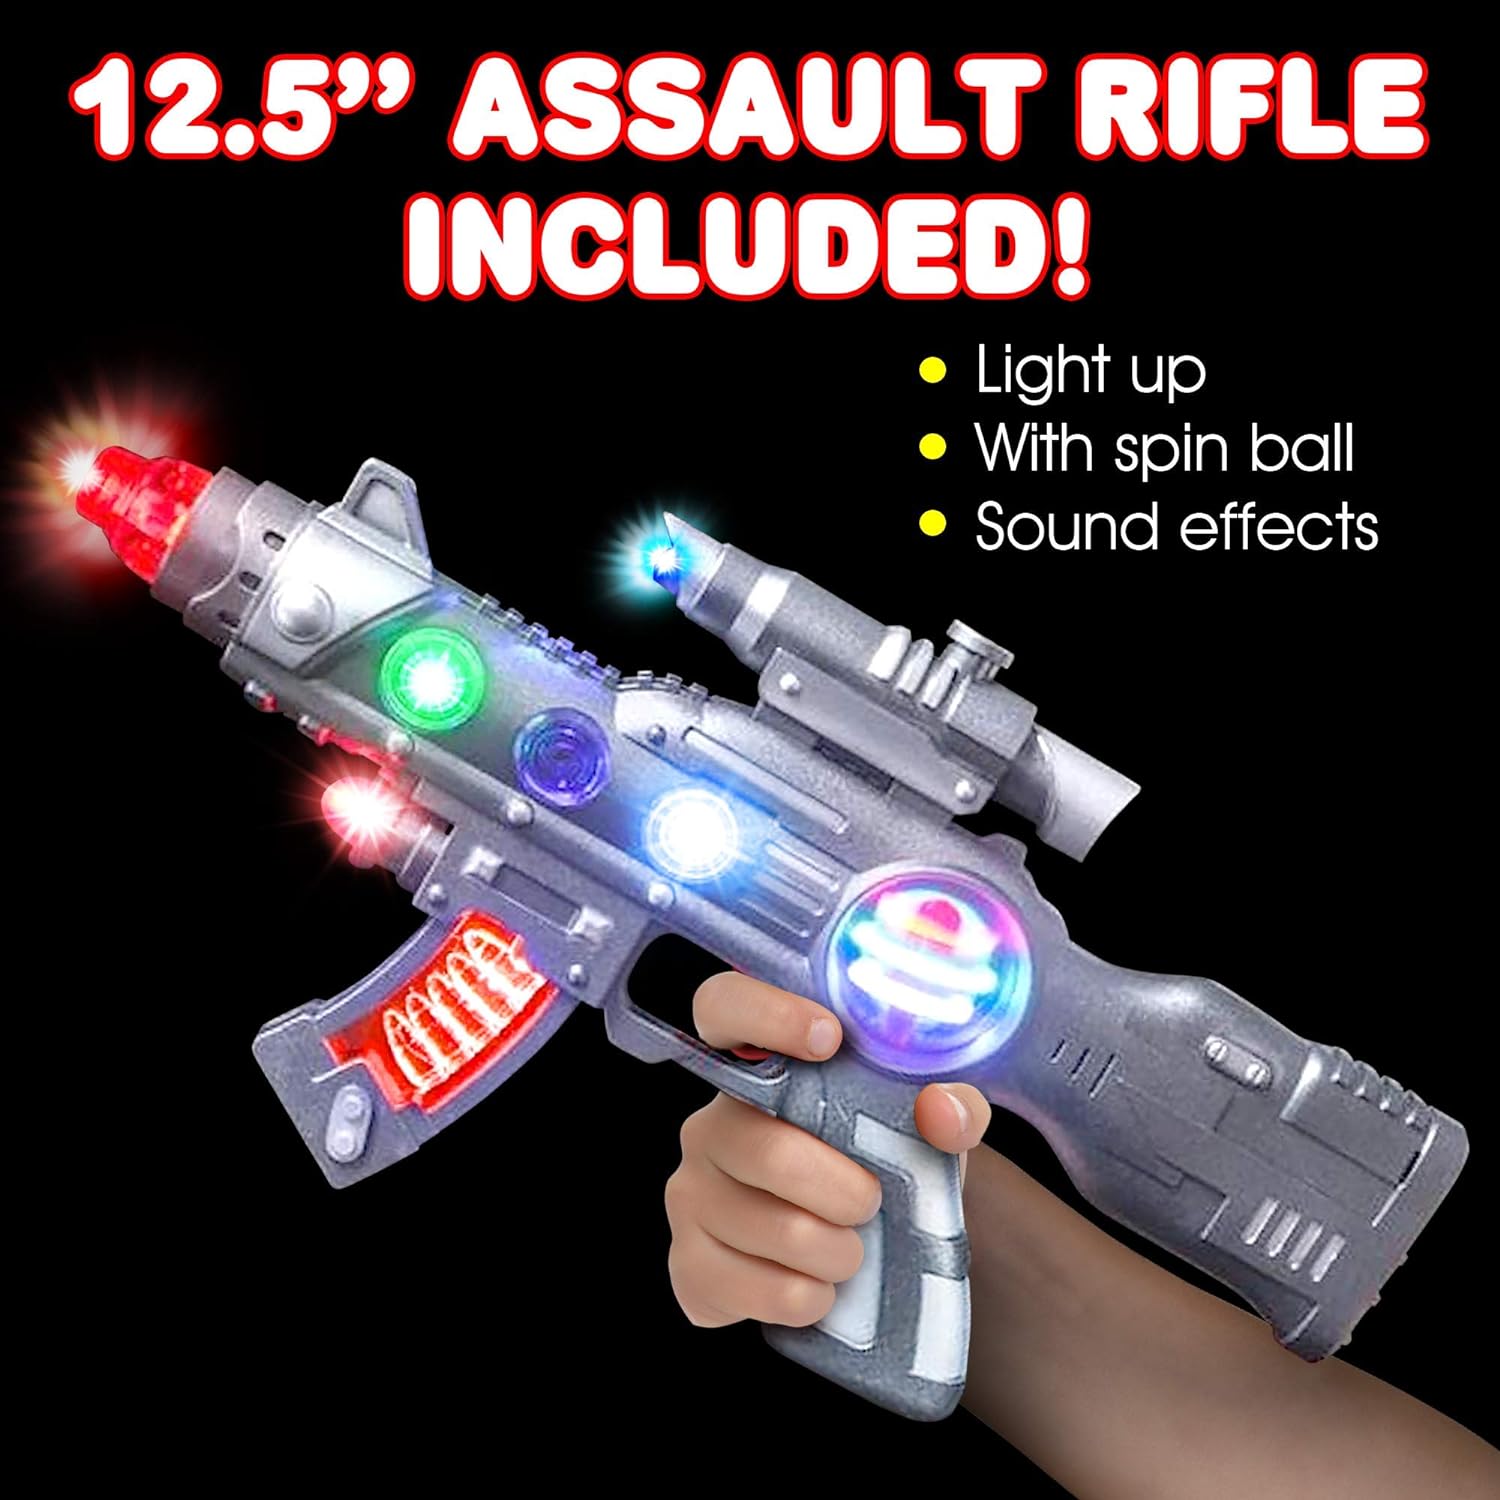 ArtCreativity Light Up Spin Ball Blaster Toy Gun, 12.5 Inch Rifle with Thrilling Multicolor LEDs and Sound Effects